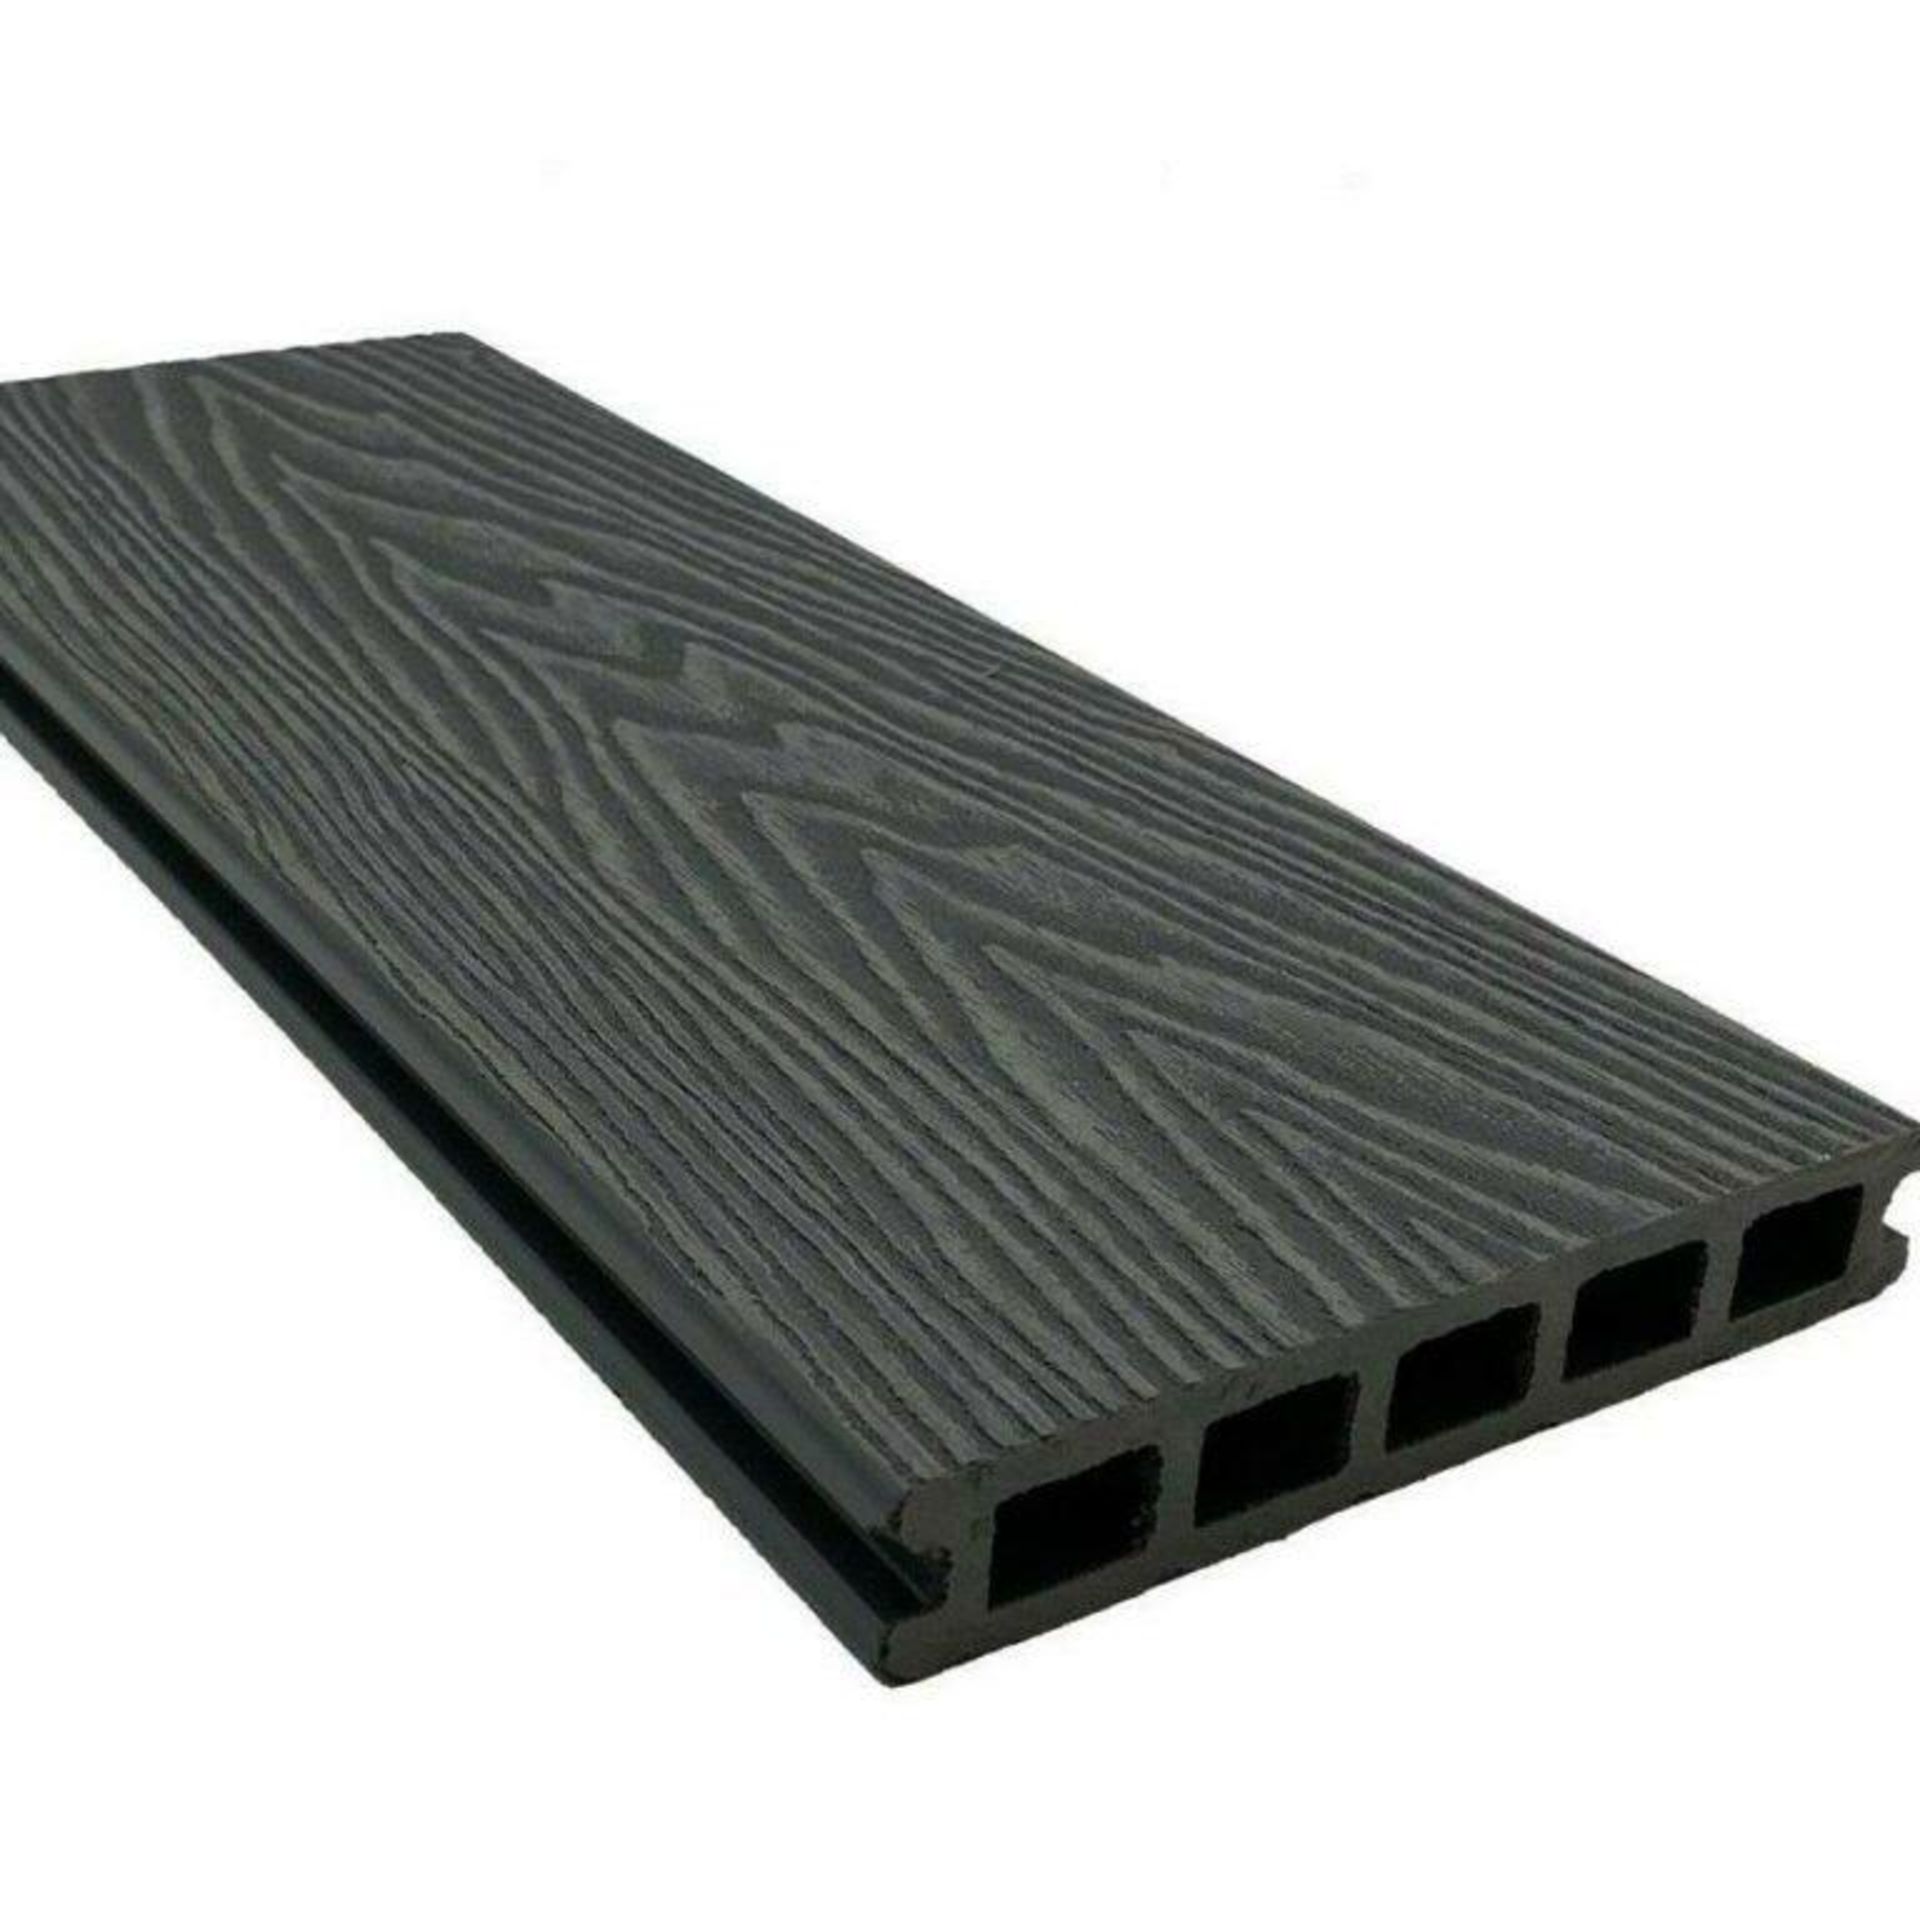 20 x Composite decking boards Colour Ash Grey - Image 2 of 3